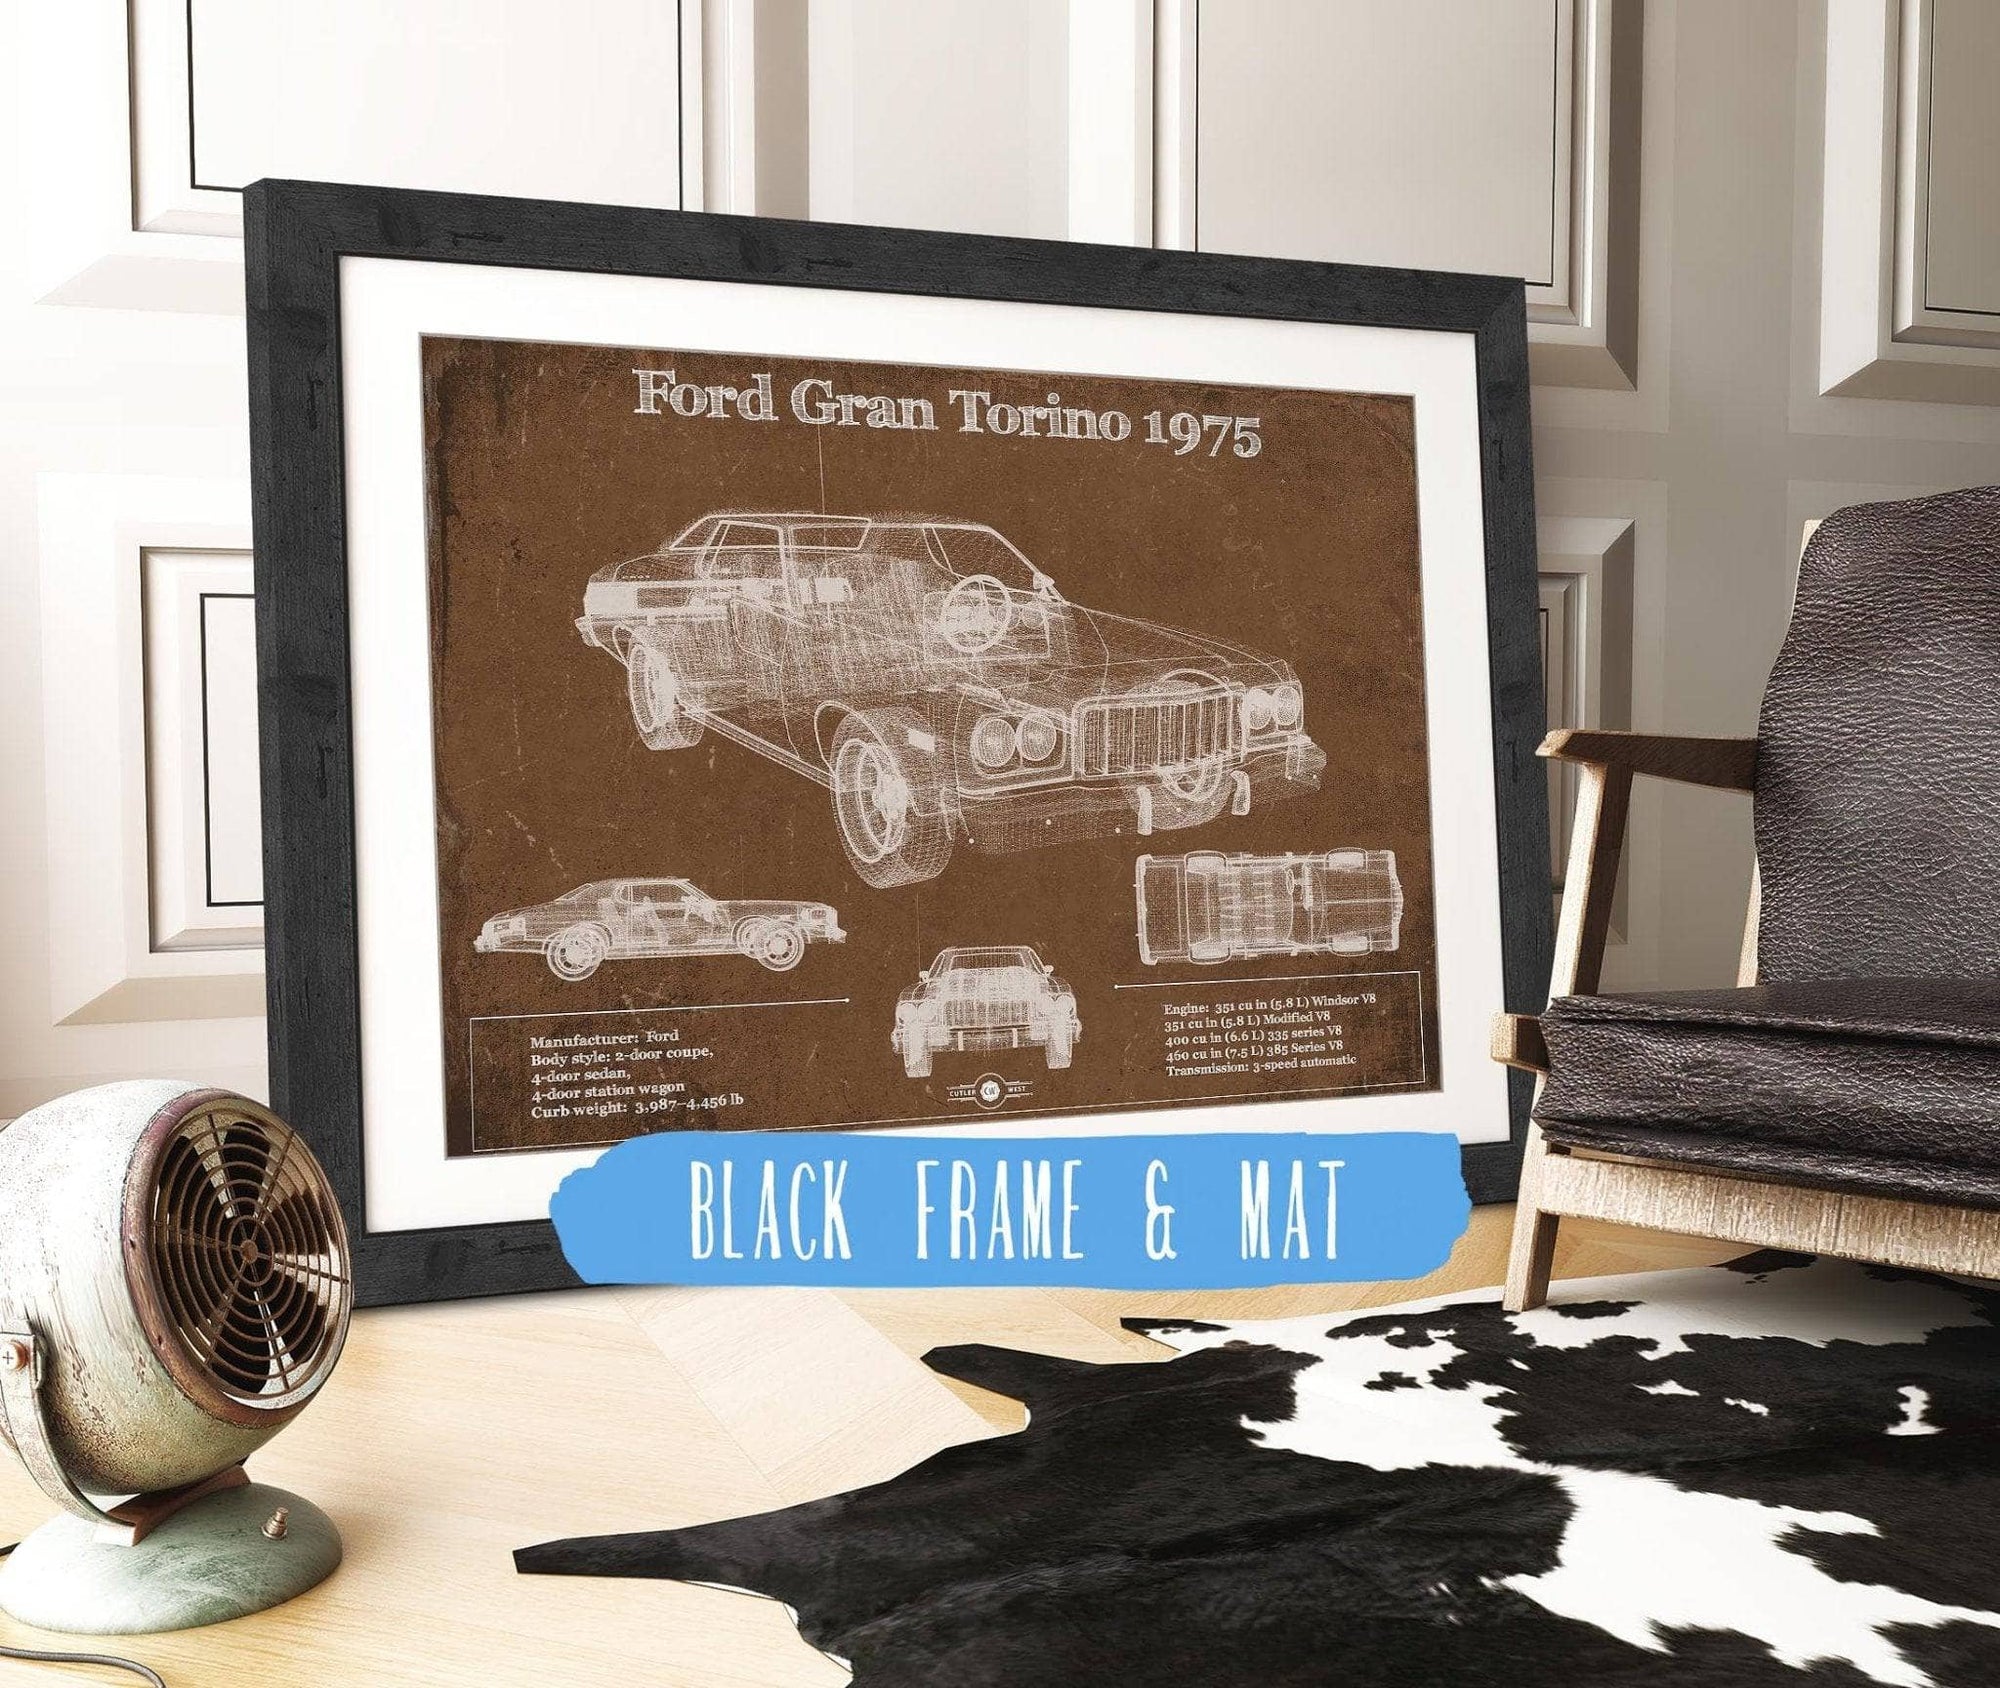 Cutler West Ford Collection 14" x 11" / Black Frame & Mat Ford Gran Torino 1975 Blueprint Vintage Auto Print 933350038_54811